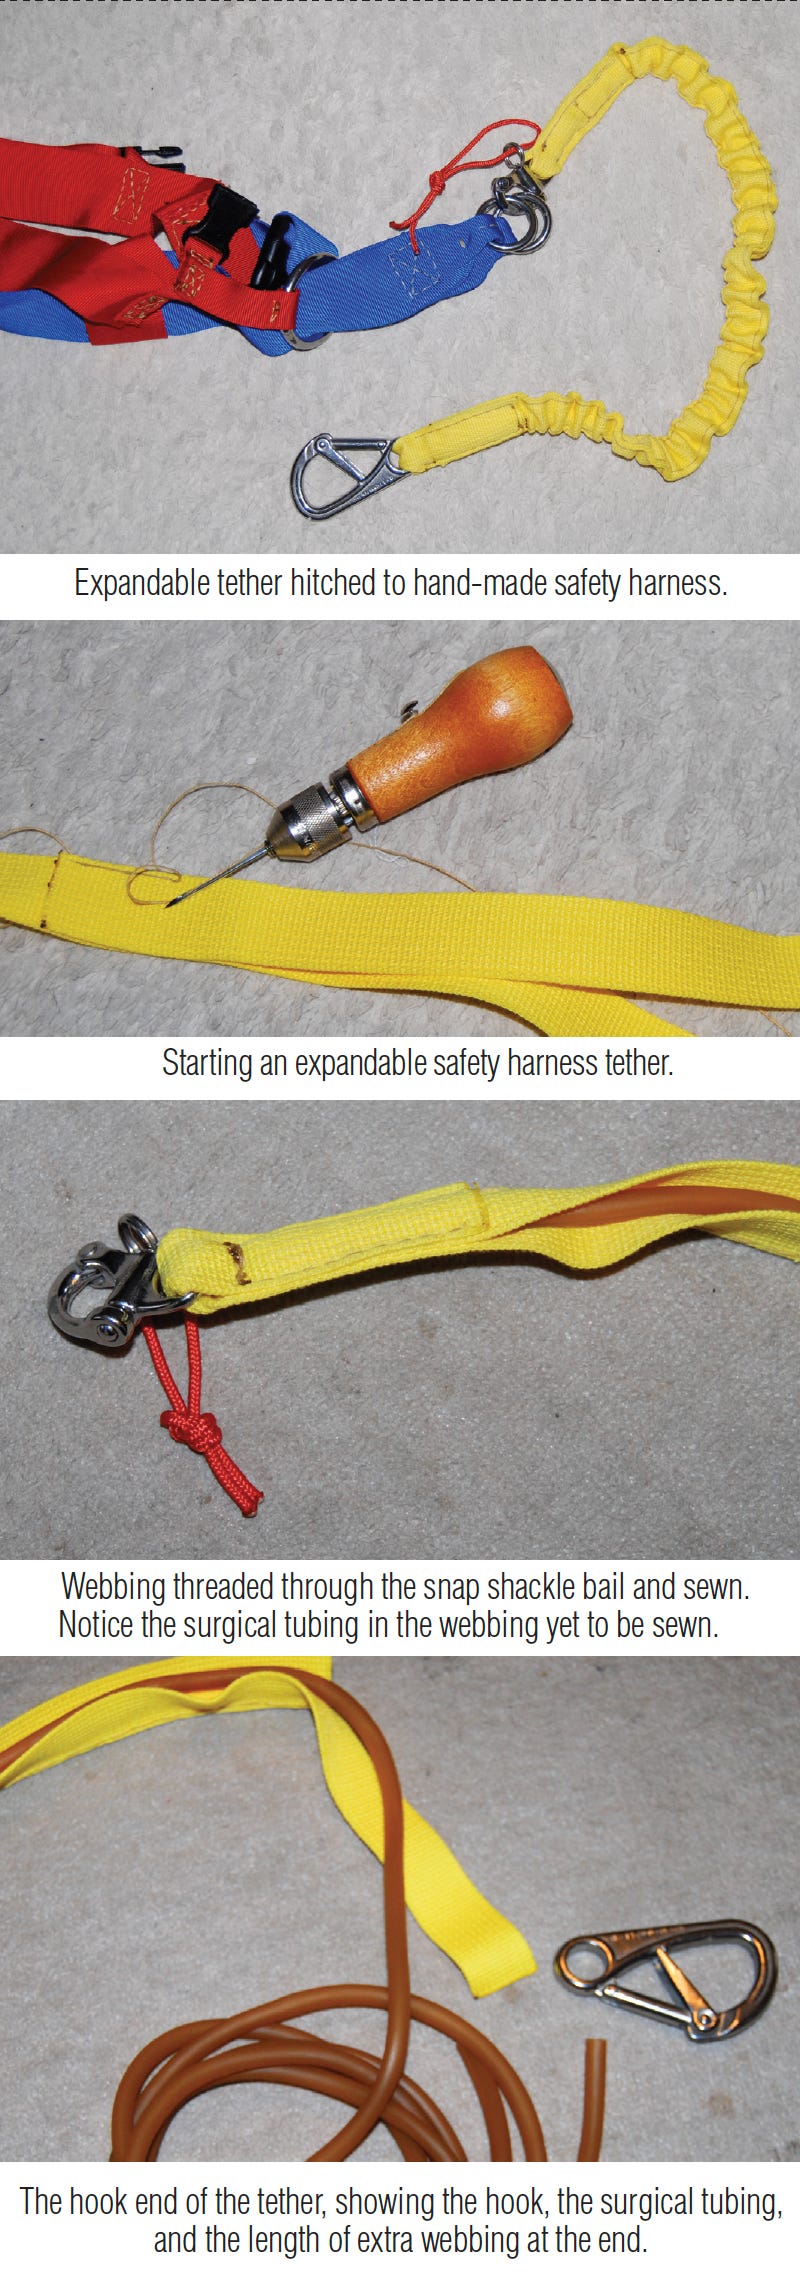 Make Your Own Expandable Safety Tether Harness